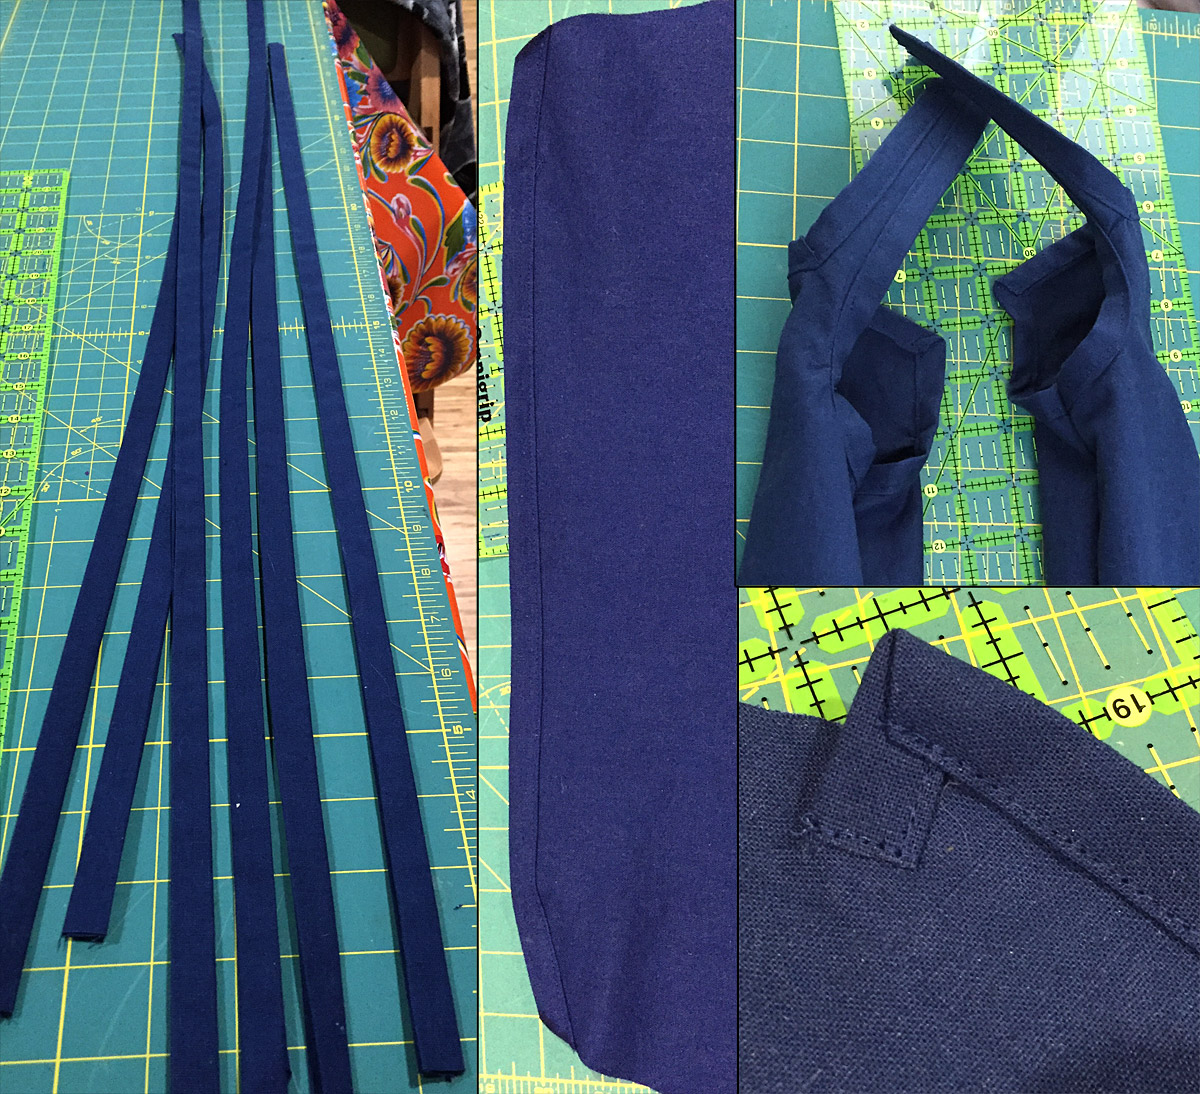 Pant Trouser Cutting and stitching #sew #sewingtipsandtricks #sewing  #sewinghacks #sewing ideas #fashiondesigning #stitch #stitching  #fashiondesigning #design #fashion | Pant Trouser Cutting and stitching  #sew #sewingtipsandtricks #sewing #sewinghacks ...